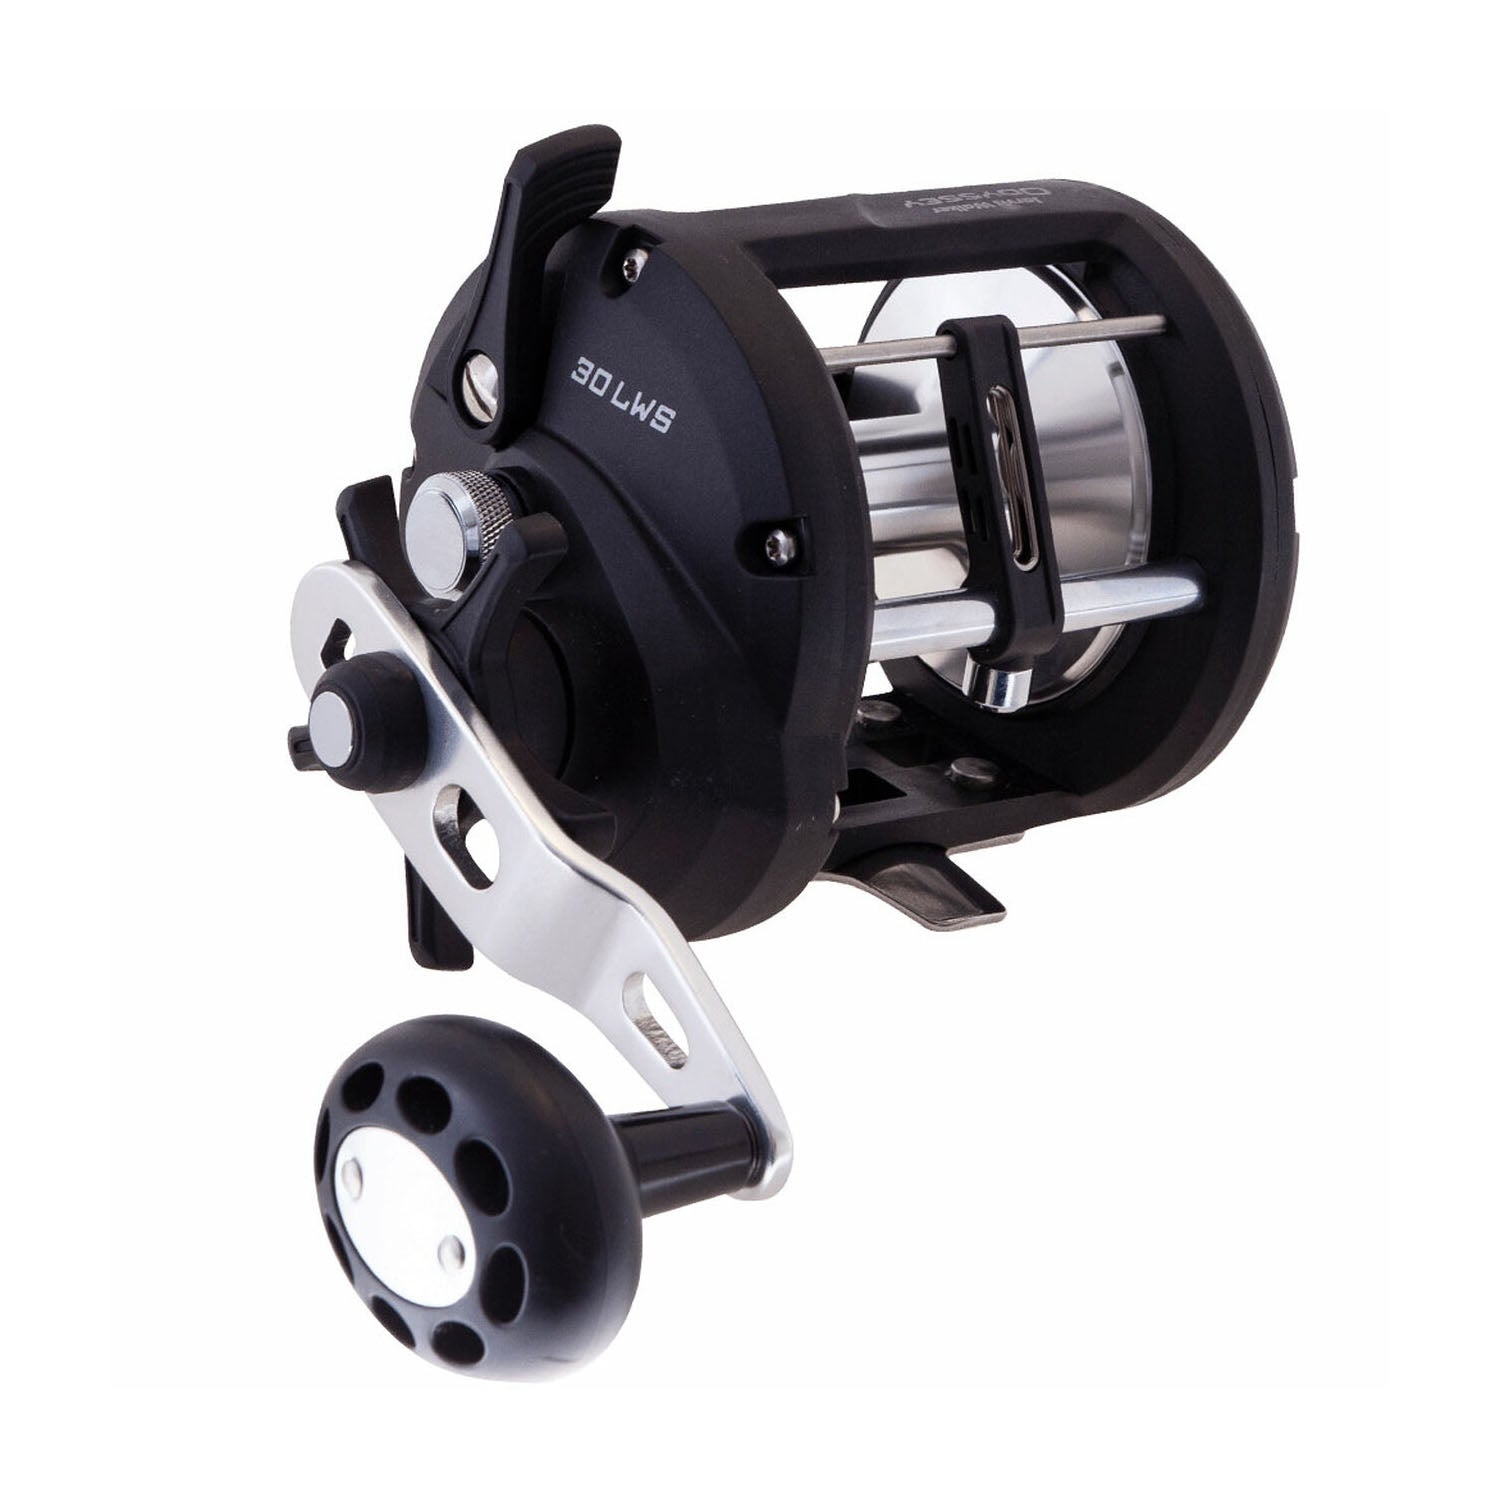 Odyssey OH Boat Reels